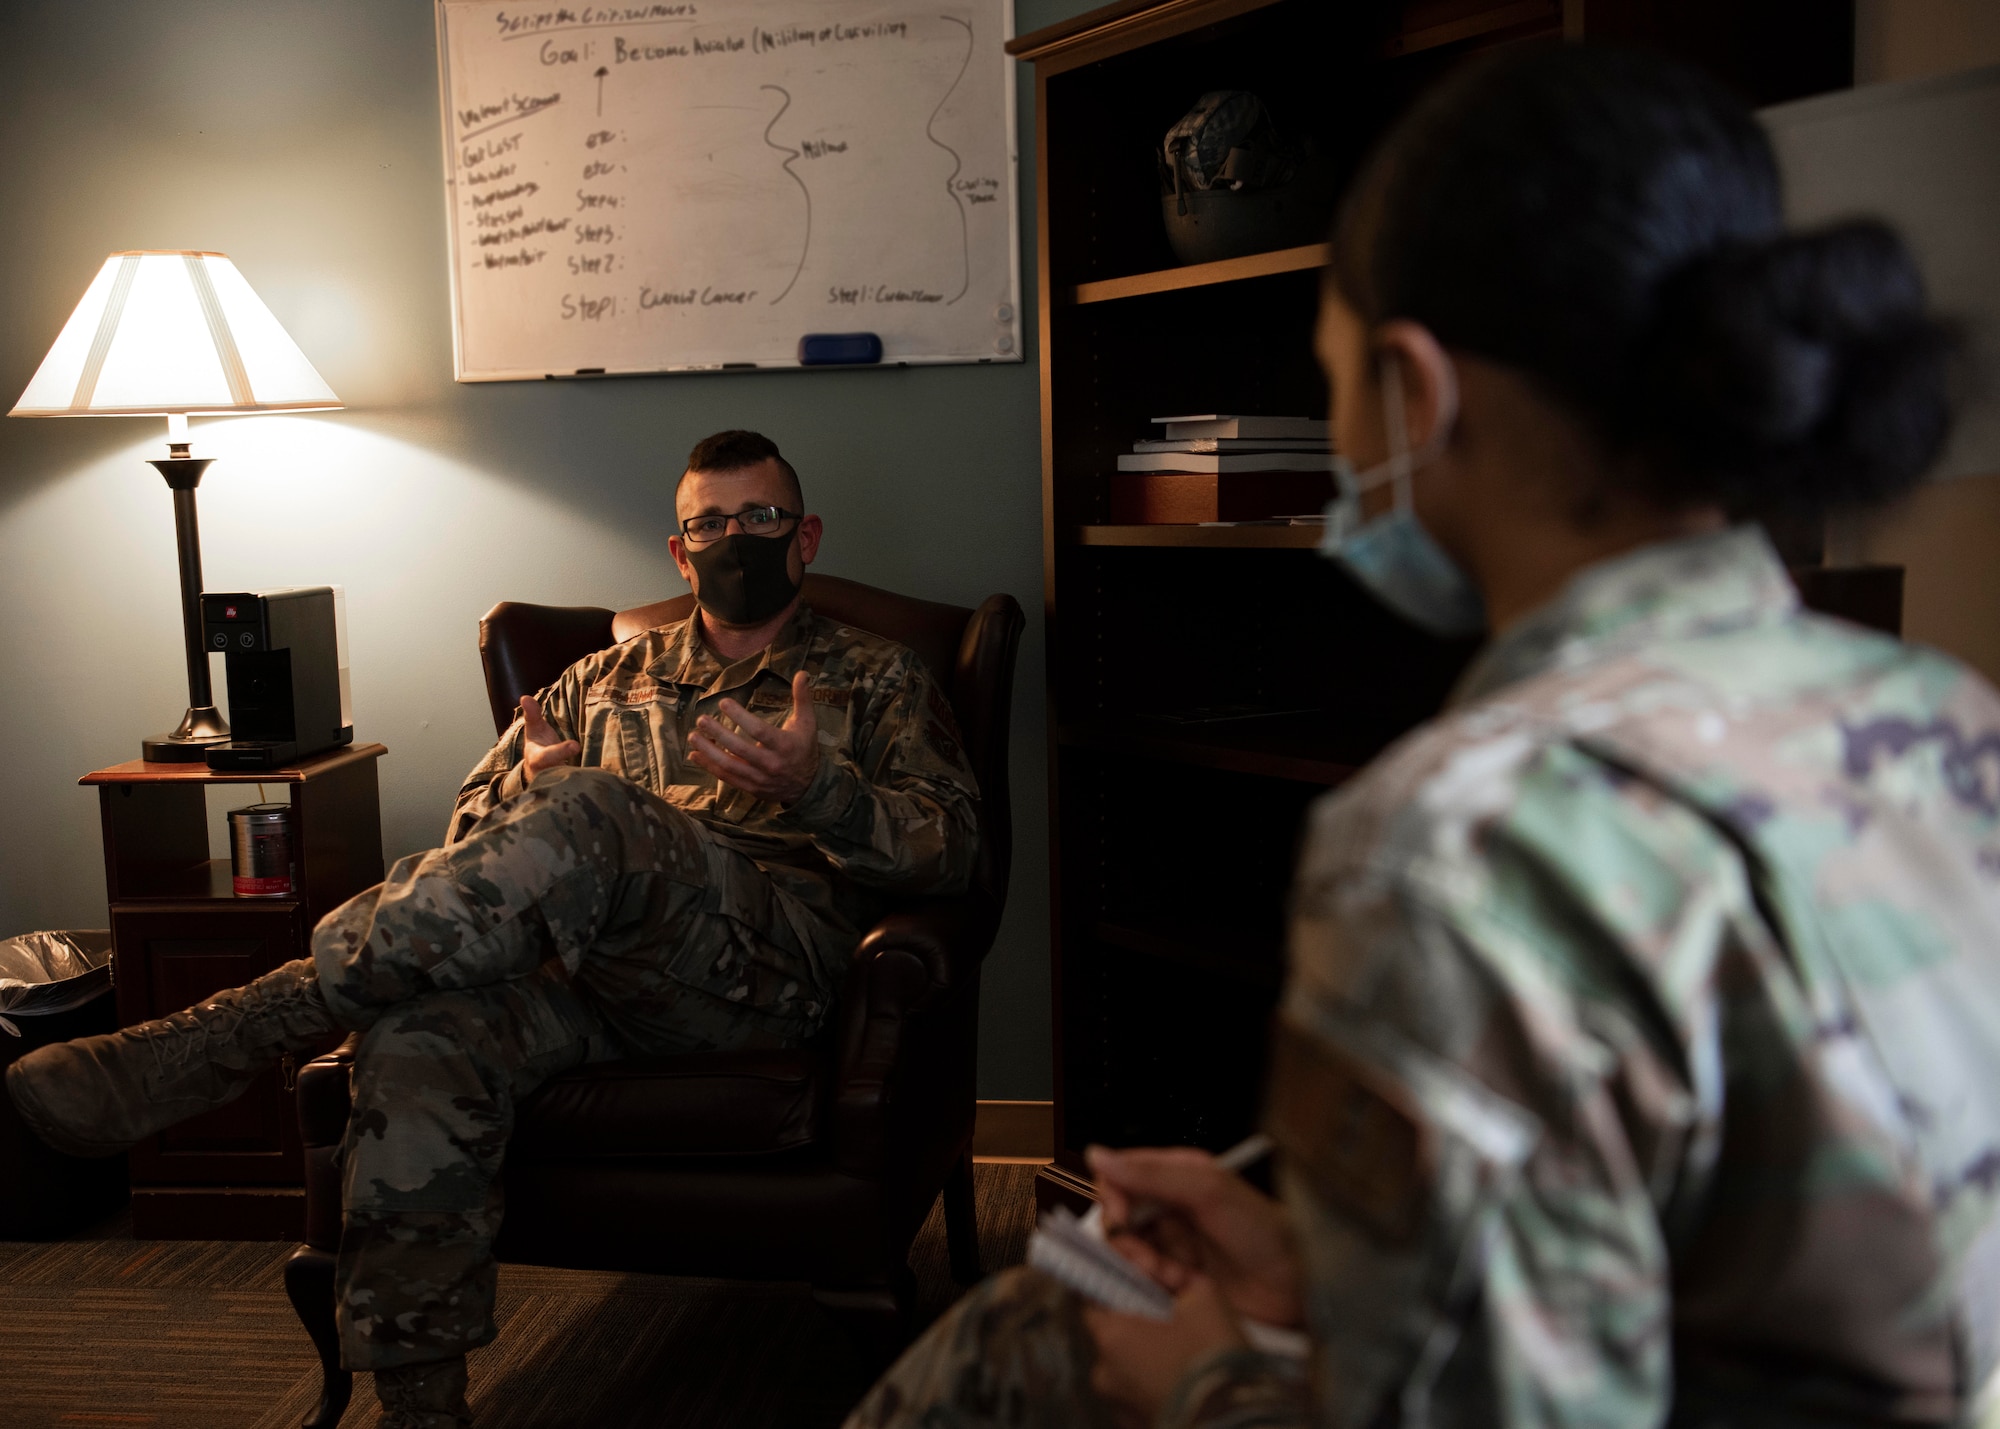 Capt. Kevin Malina, 36th Medical Operations Squadron mental health provider, speaks with an Airman during a session in his office at Andersen Air Force Base, Guam, Jan. 28, 2021. Over the past 56 years, the Biomedical Science Corps has undergone changes, adapted, and innovated to provide the best care possible for the Airmen they service. (U.S. Air Force photo by Senior Airman Aubree Owens)